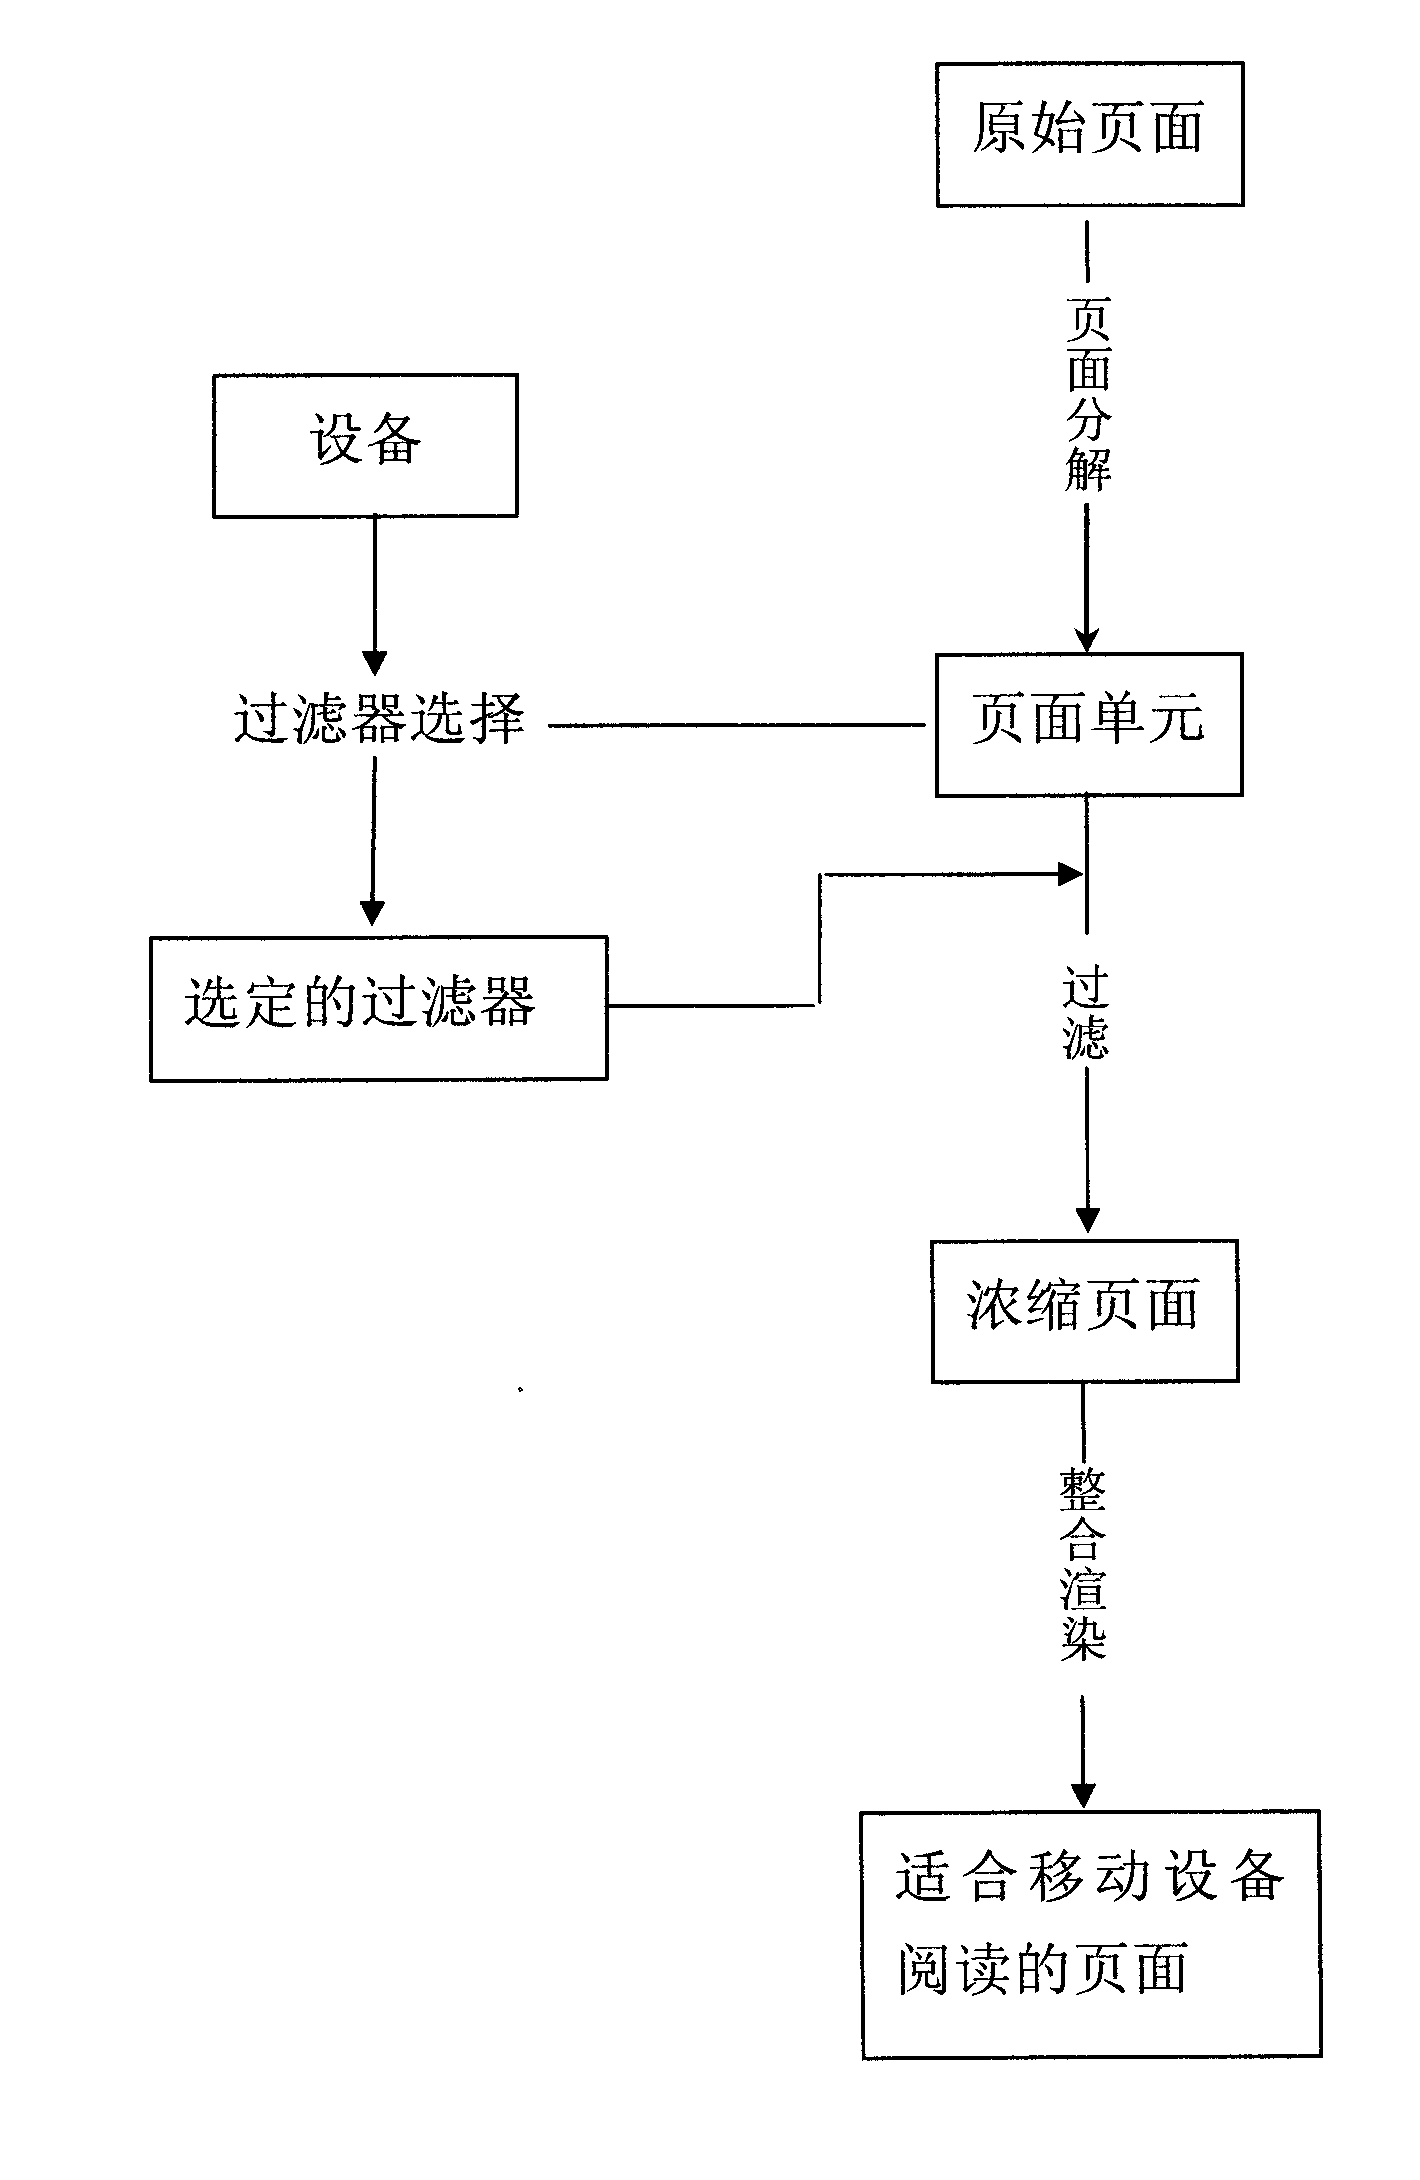 Method for displaying network contents on electronic paper book